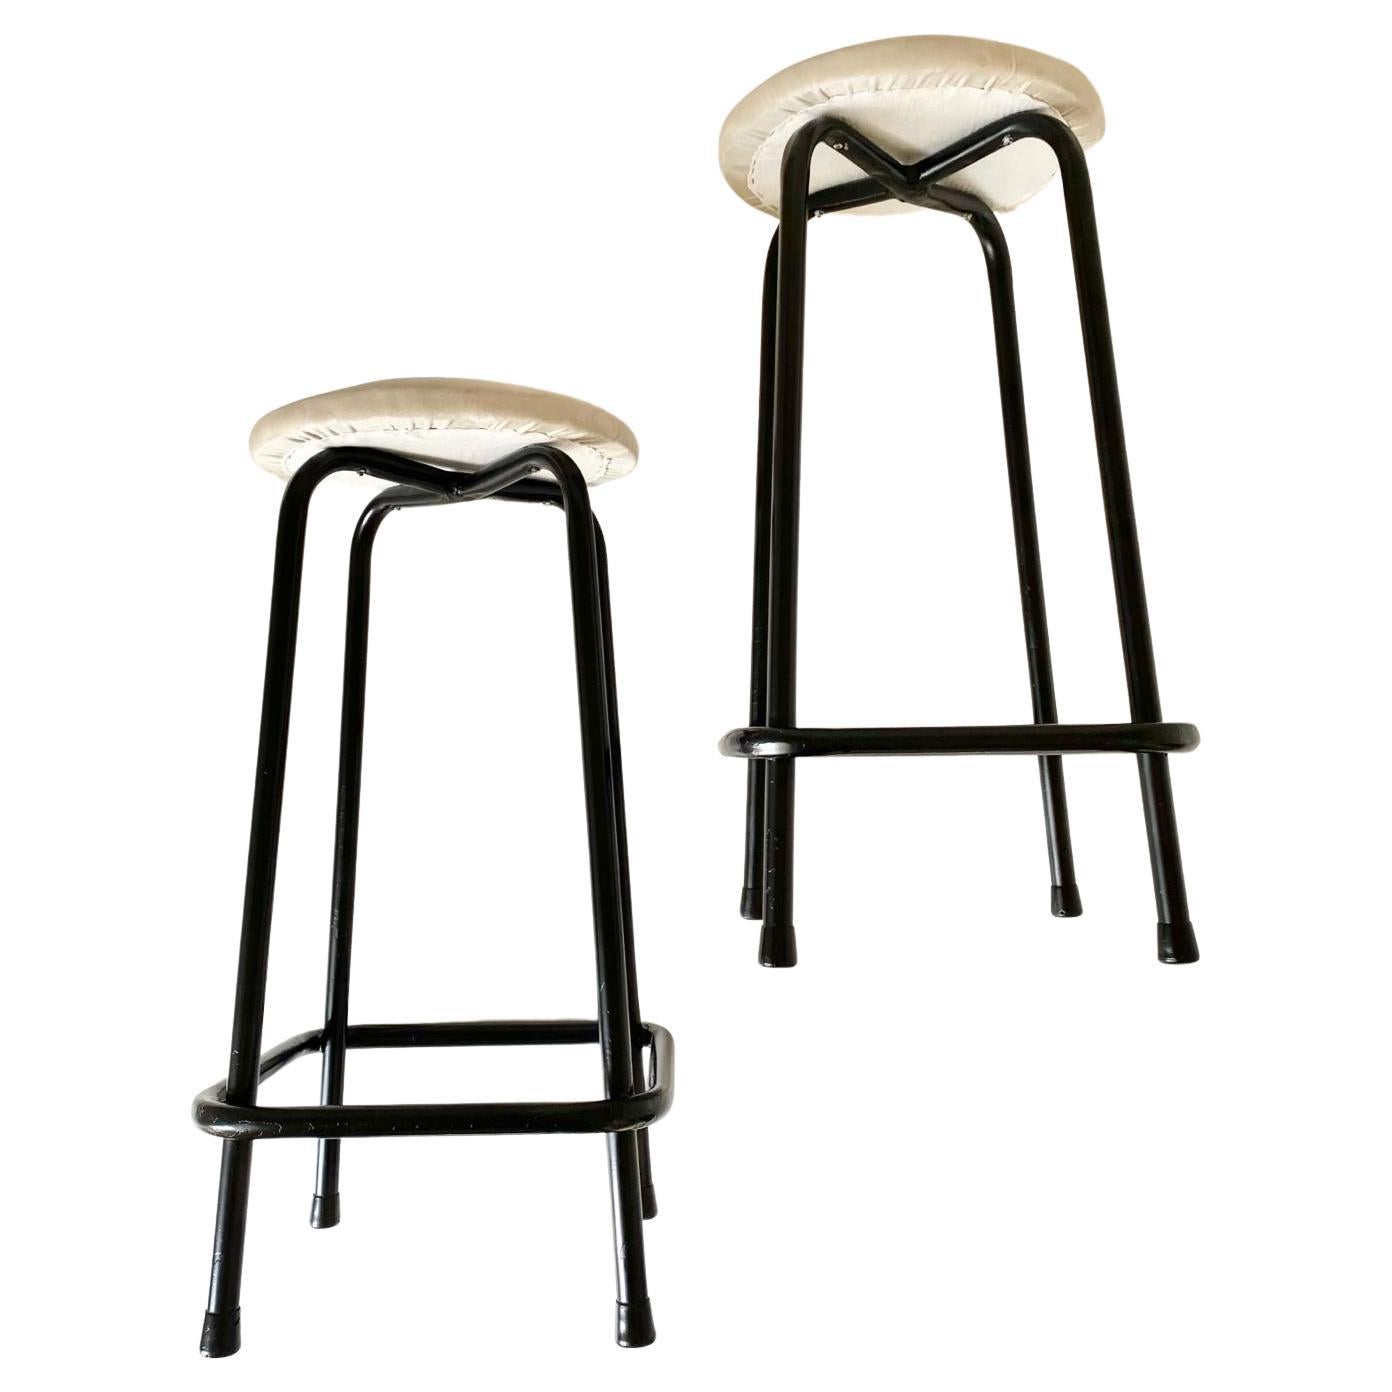 Italian Midcentury Modern Industrial Iron and Velvet Stools, Set of Two, Italy 1960s For Sale